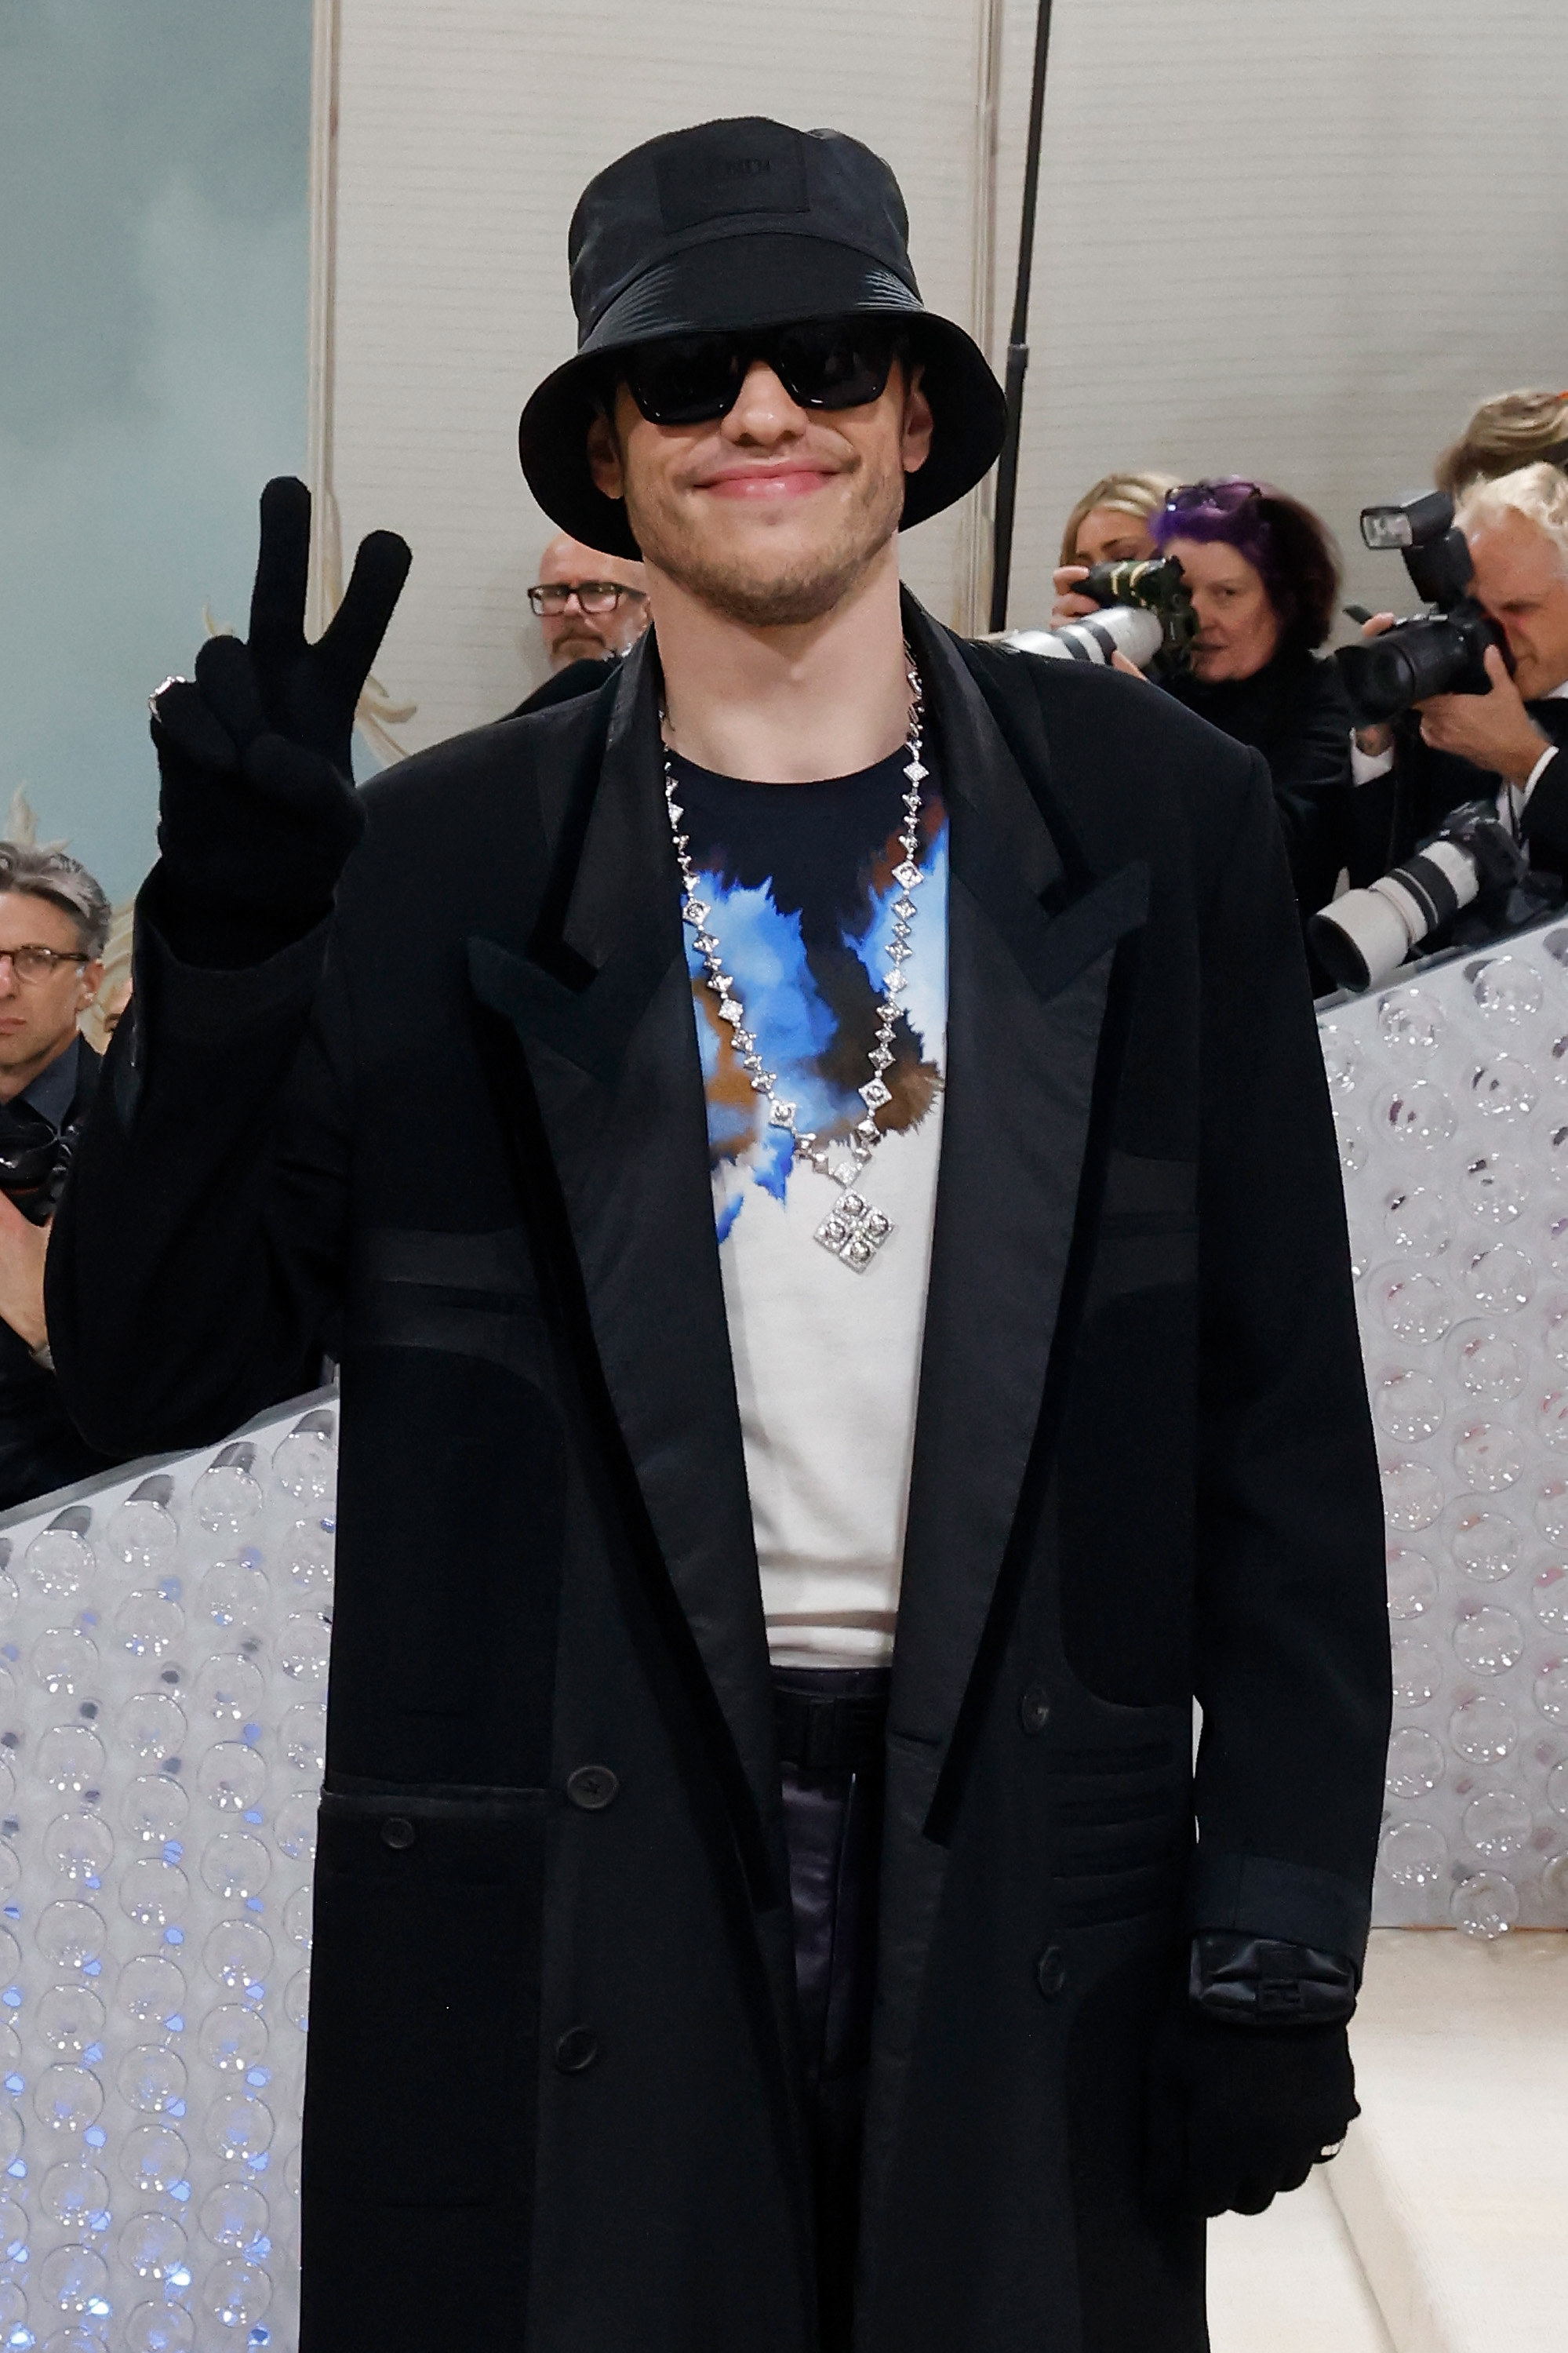 Pete giving the peace sign as he stands at a red carpet event. He&#x27;s wearing a long coat, gloves, bucket hat, sunglasses, and a chain